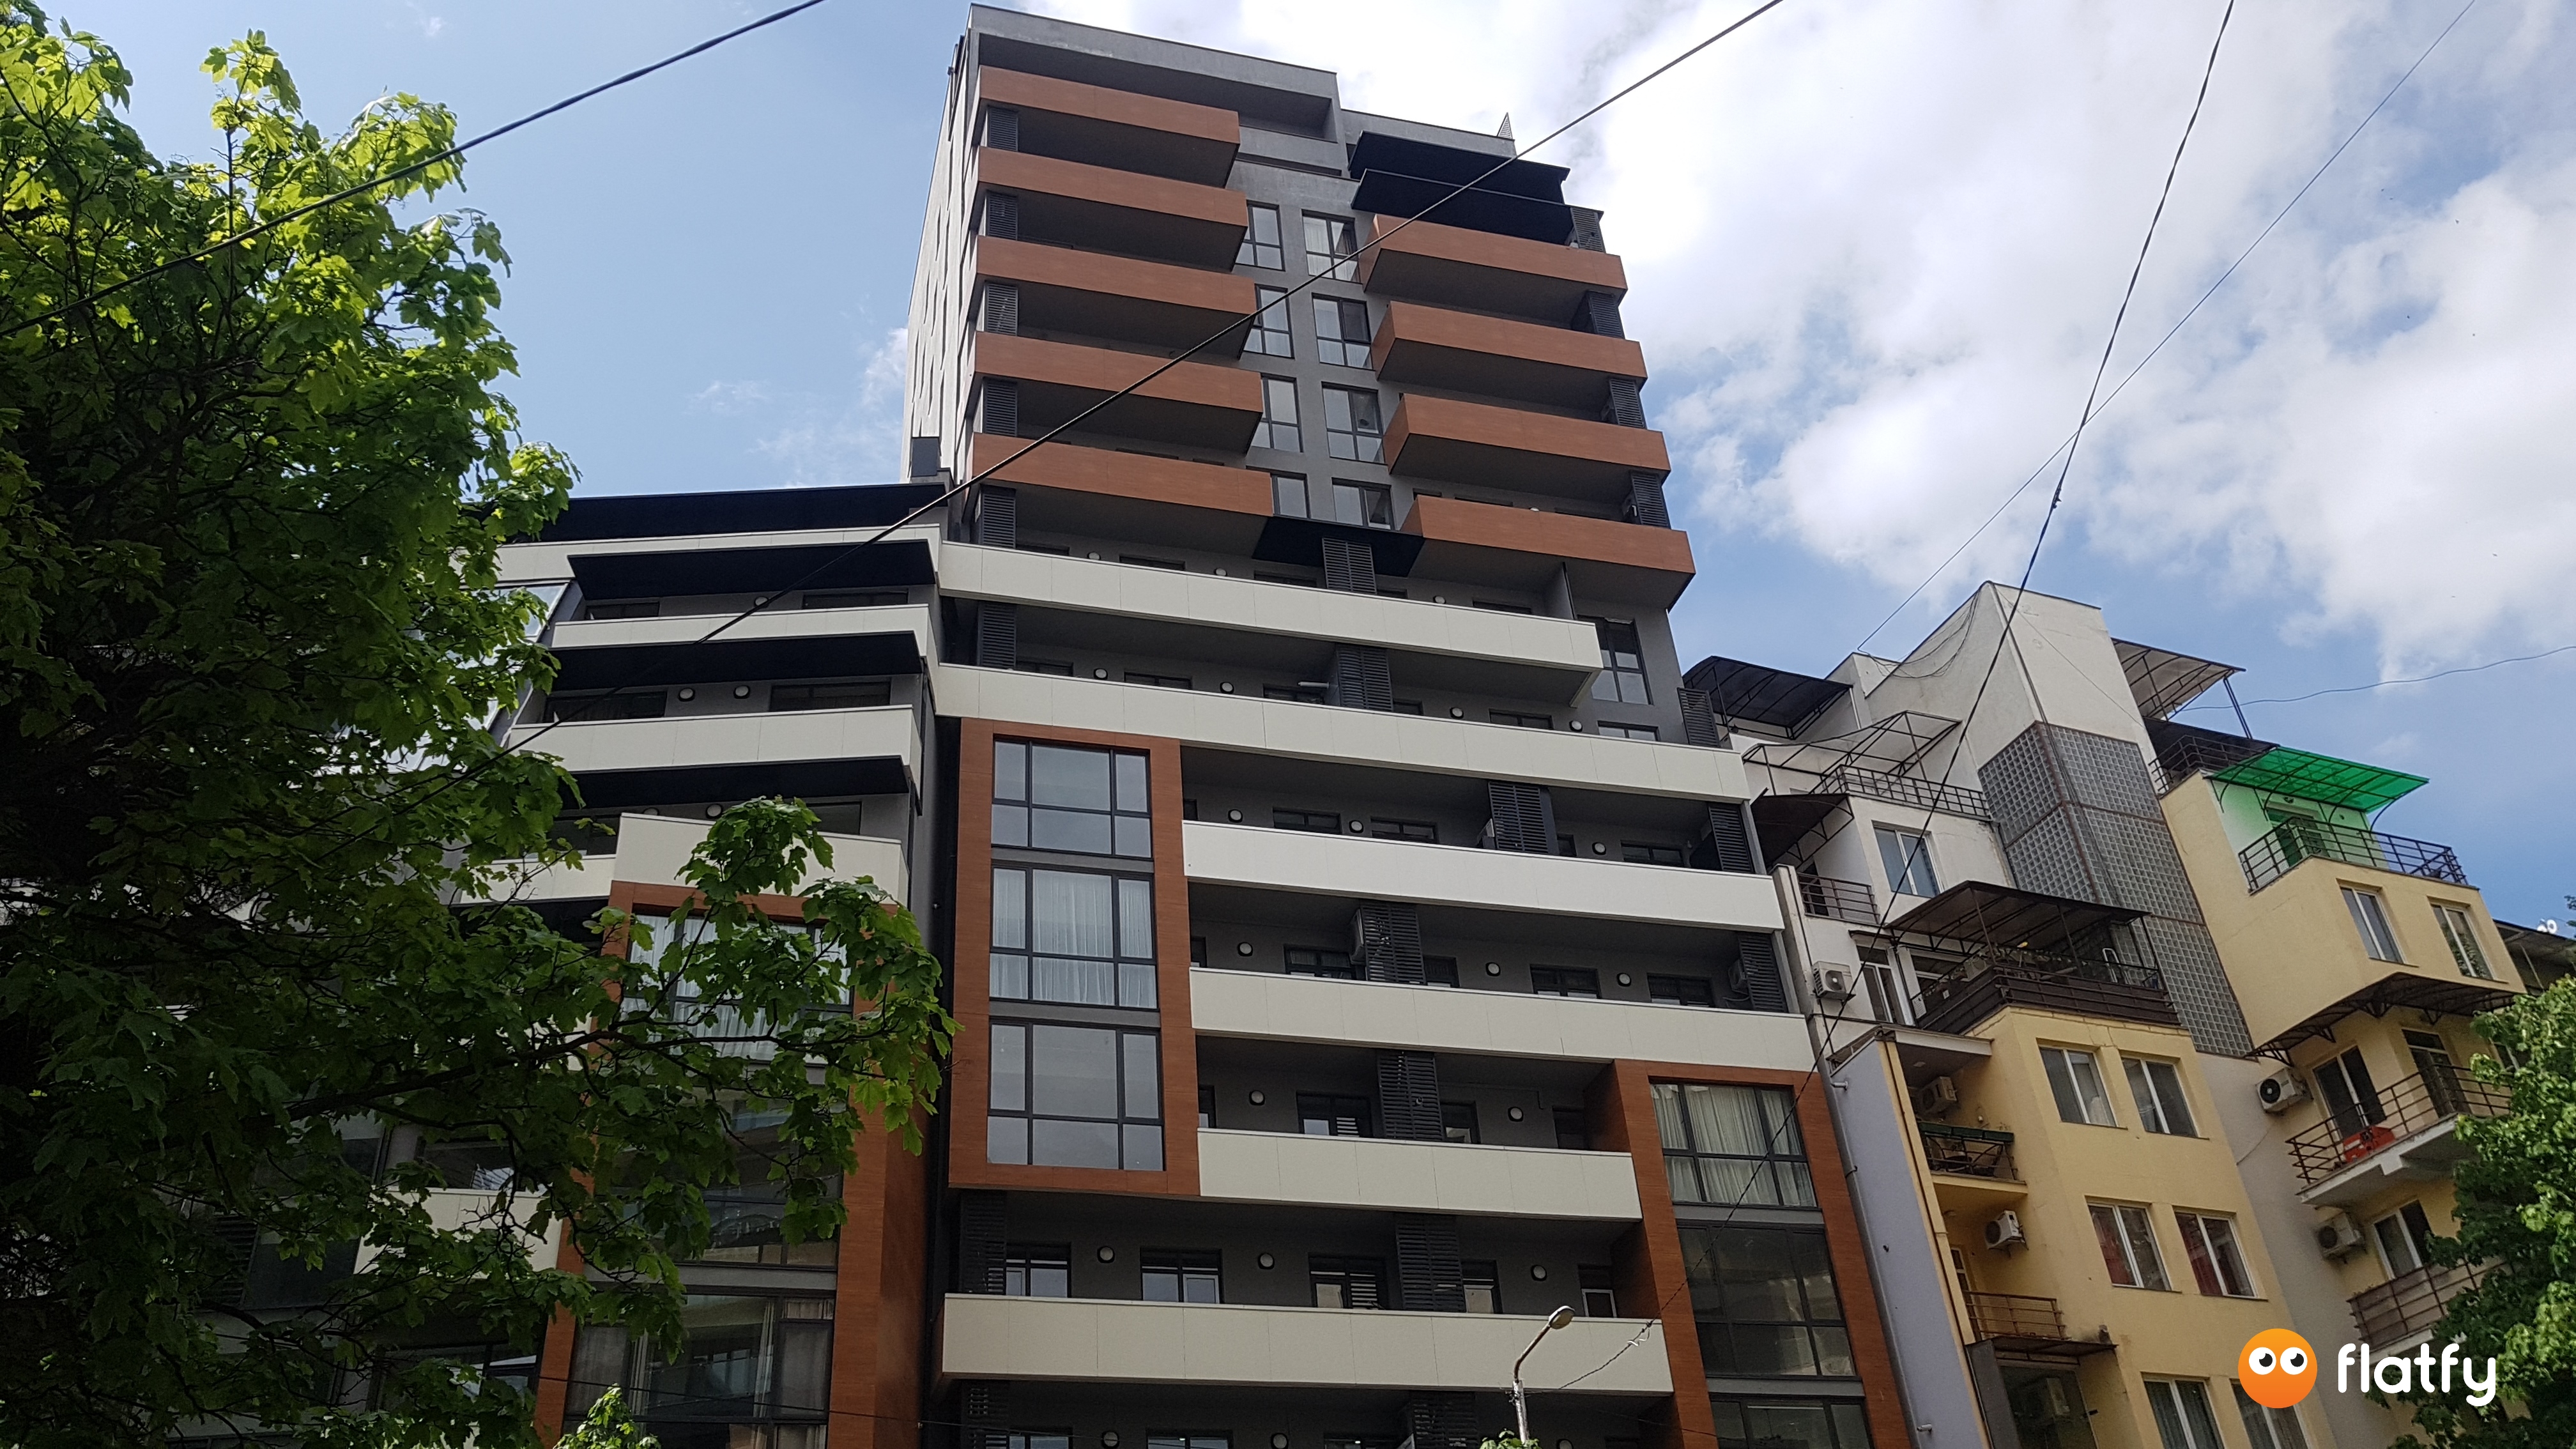 Construction progress Round Square Residence - Angle 1, May 2019